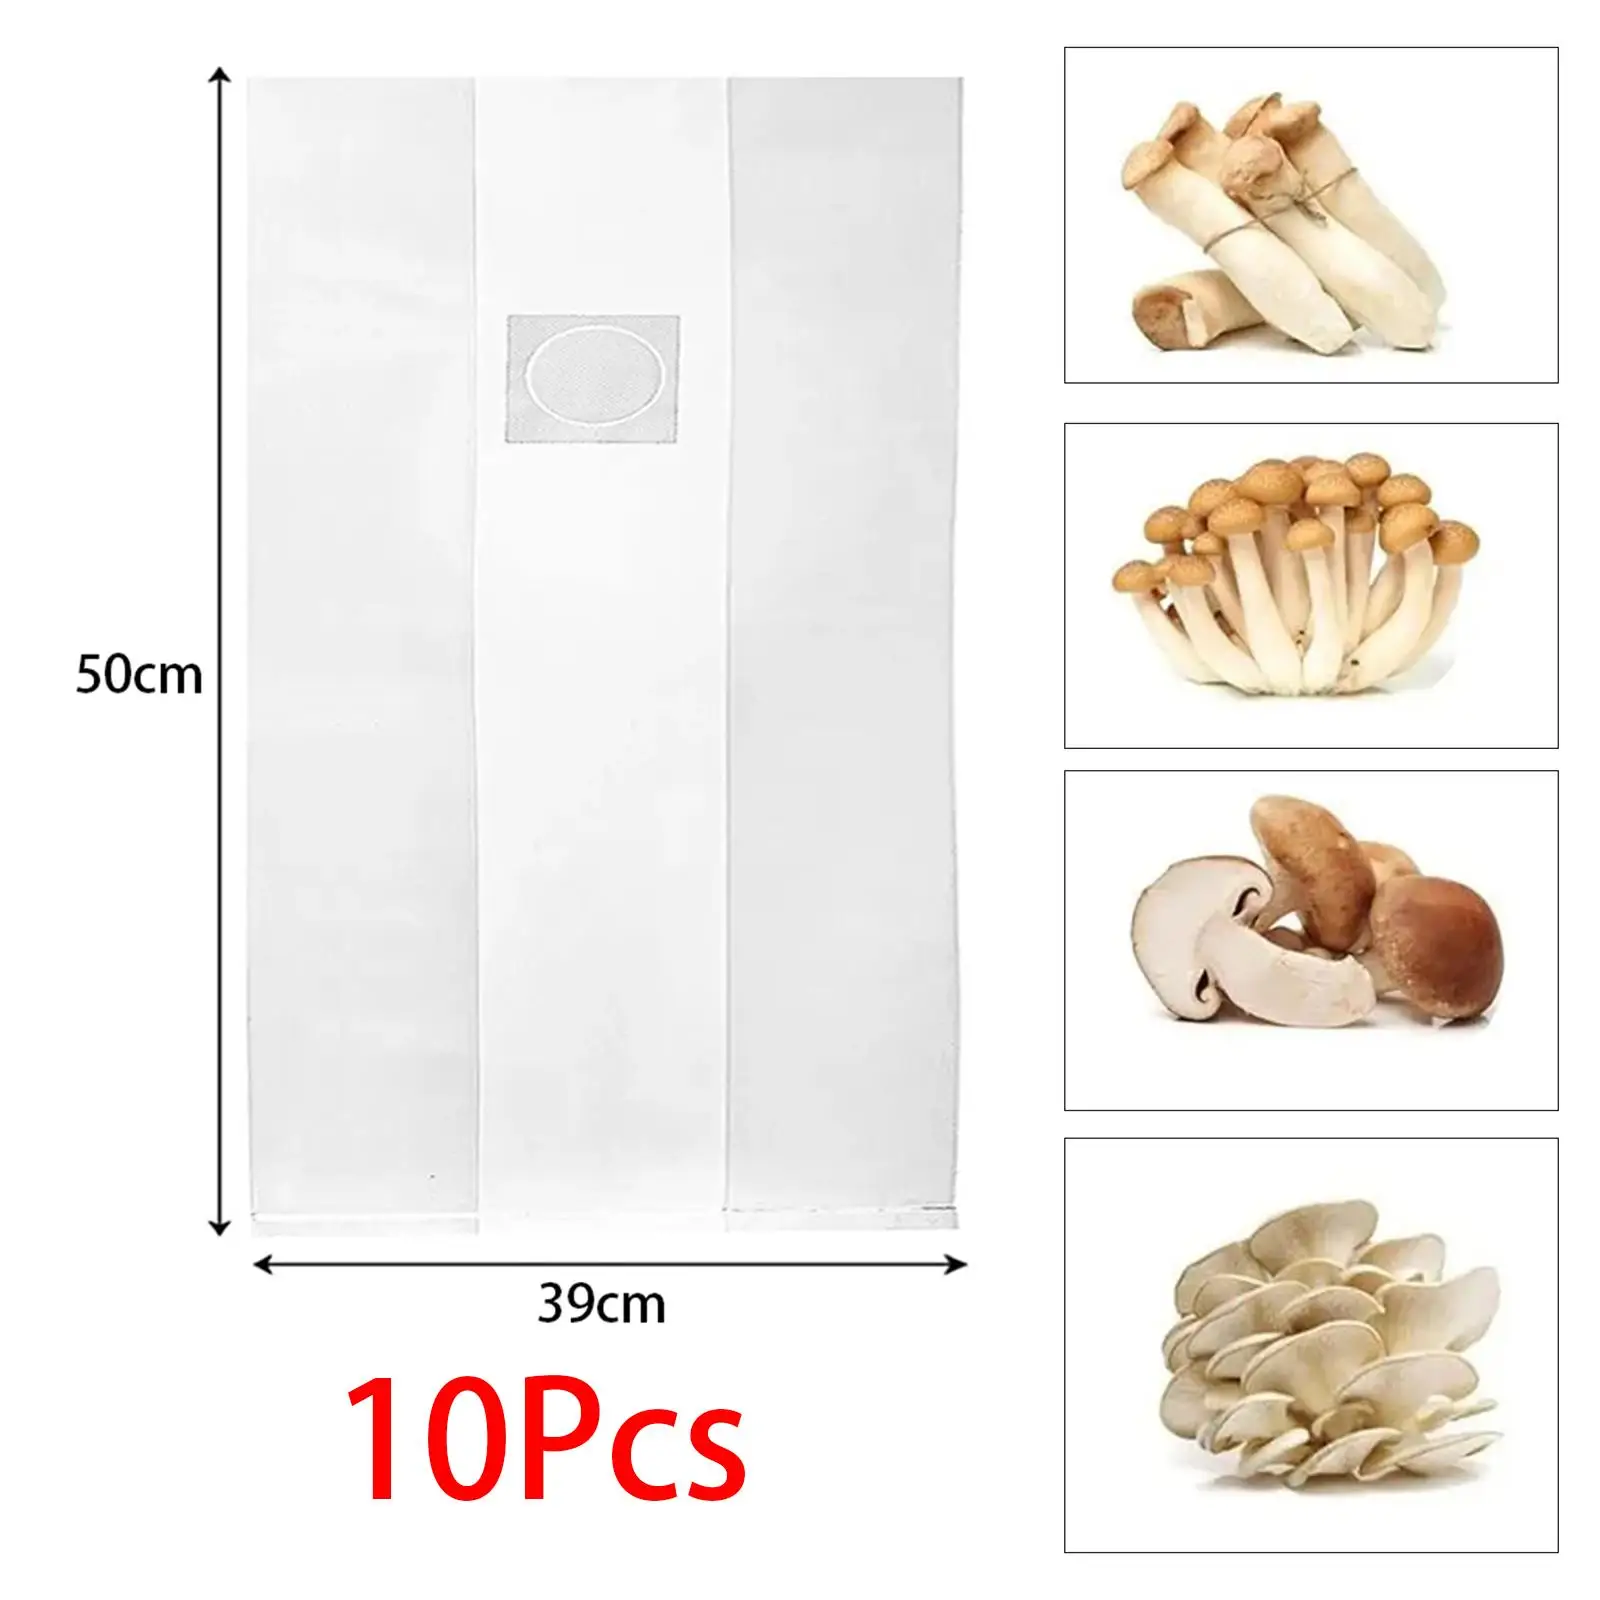 10x Edible Fungi Growing Bags Bulk Breathable 6 Mils Thick Spawns Bags